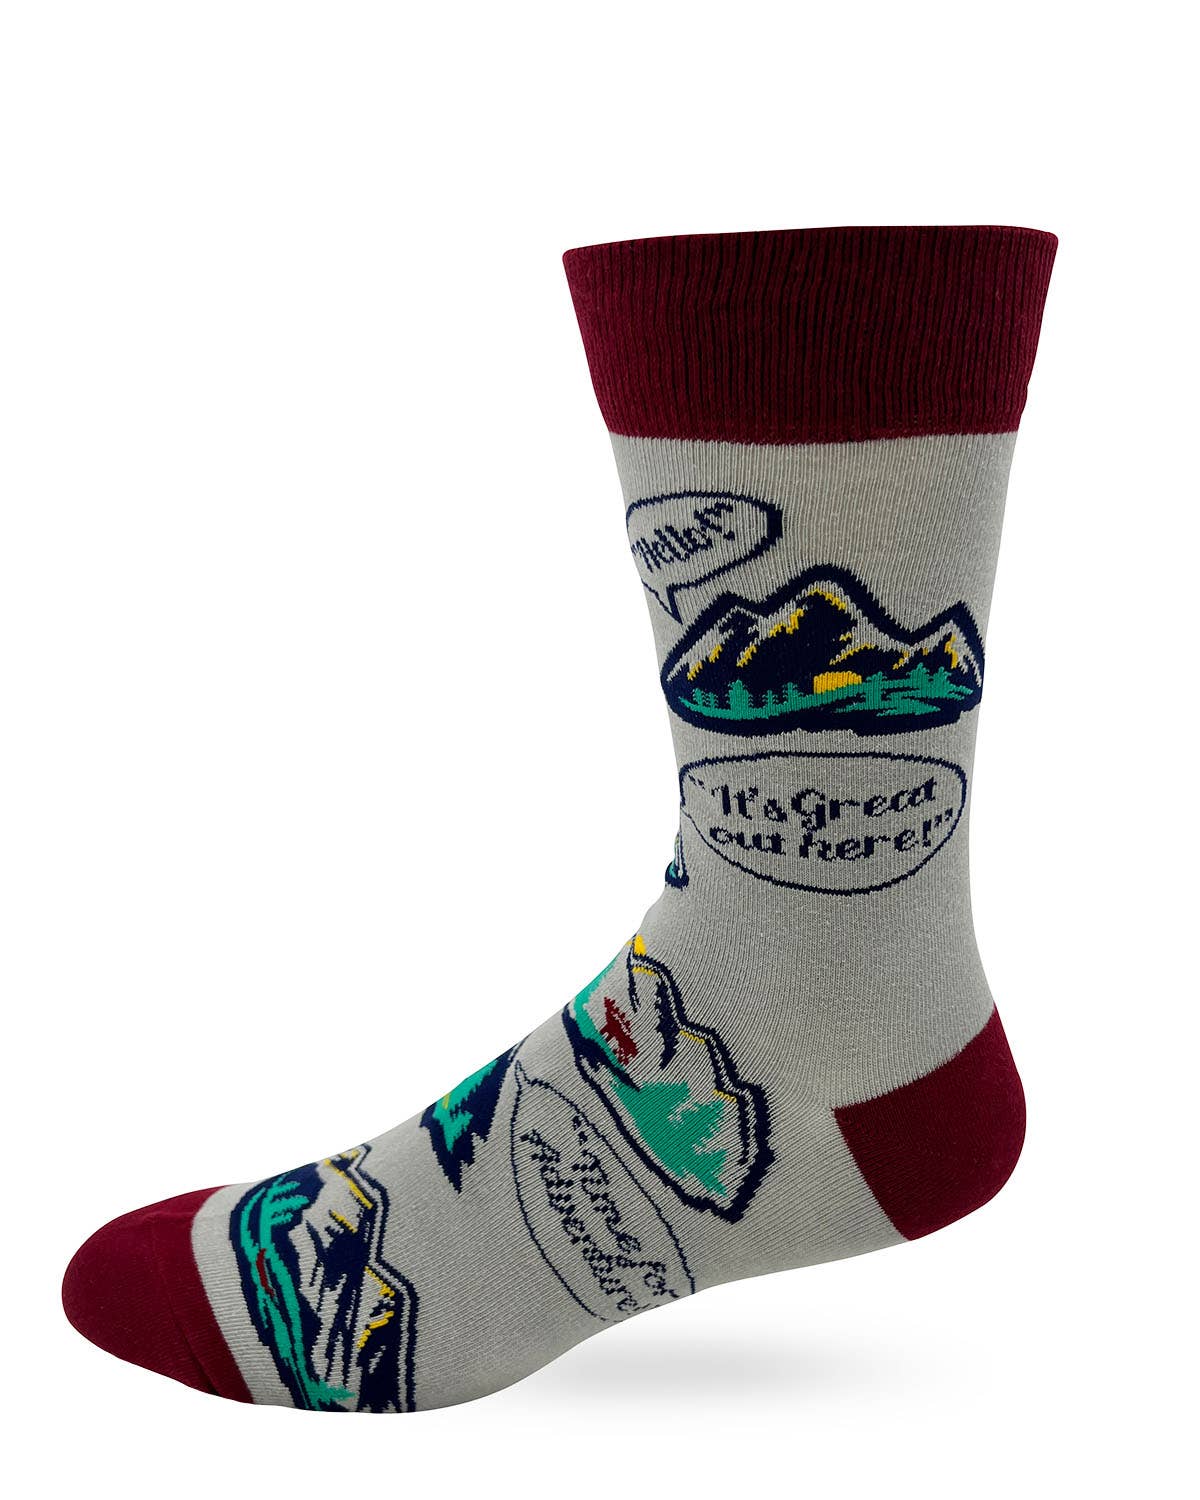 The Mountains Are Calling Men's Novelty Crew Socks